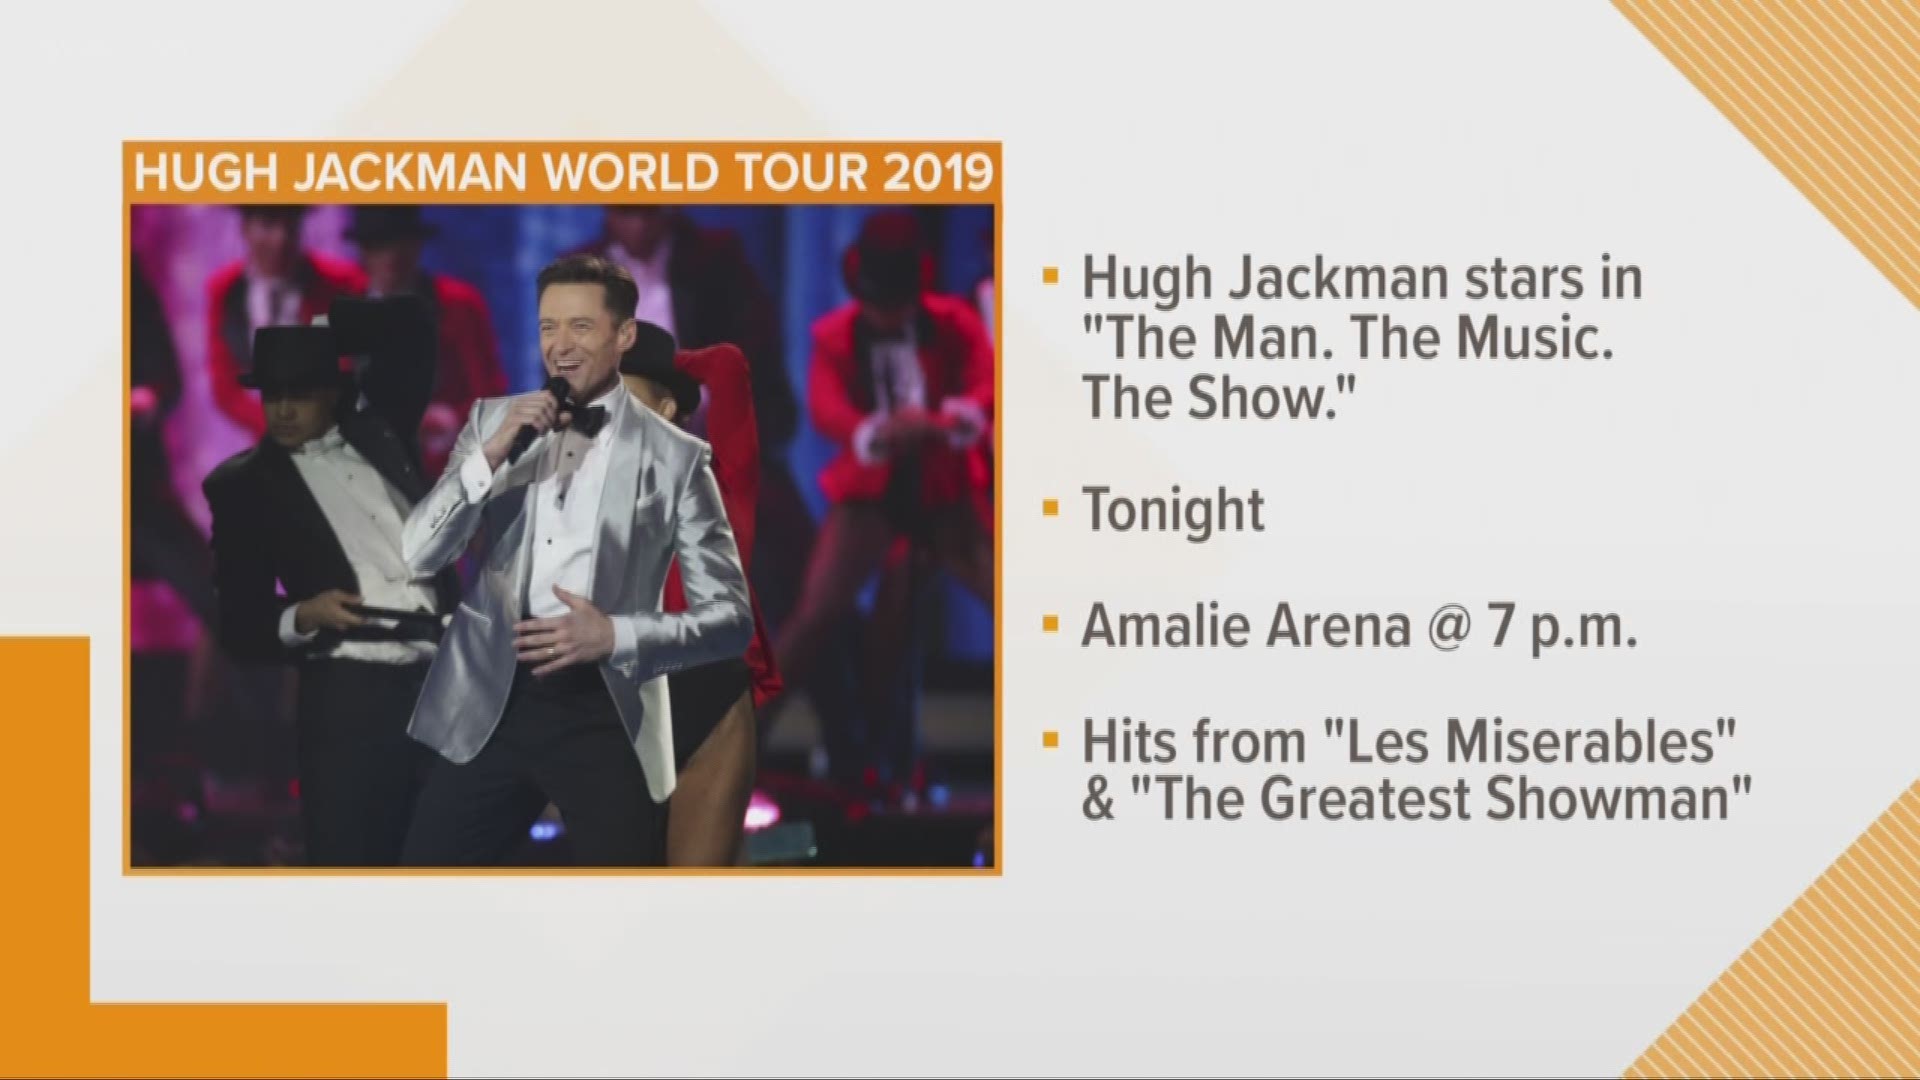 He portrayed "The Greatest Showman" P.T. Barnum and a former French prisoner during the June Rebellion in "Les Misérables." Now, Hugh Jackman is showcasing his talents on a world tour in 2019. The Golden Globe and Tony award-winning performer brings his "The Man. The Music. The Show." tour to Tampa Friday night. Tickets start at $29.50 through Ticketmaster and the tour's website.